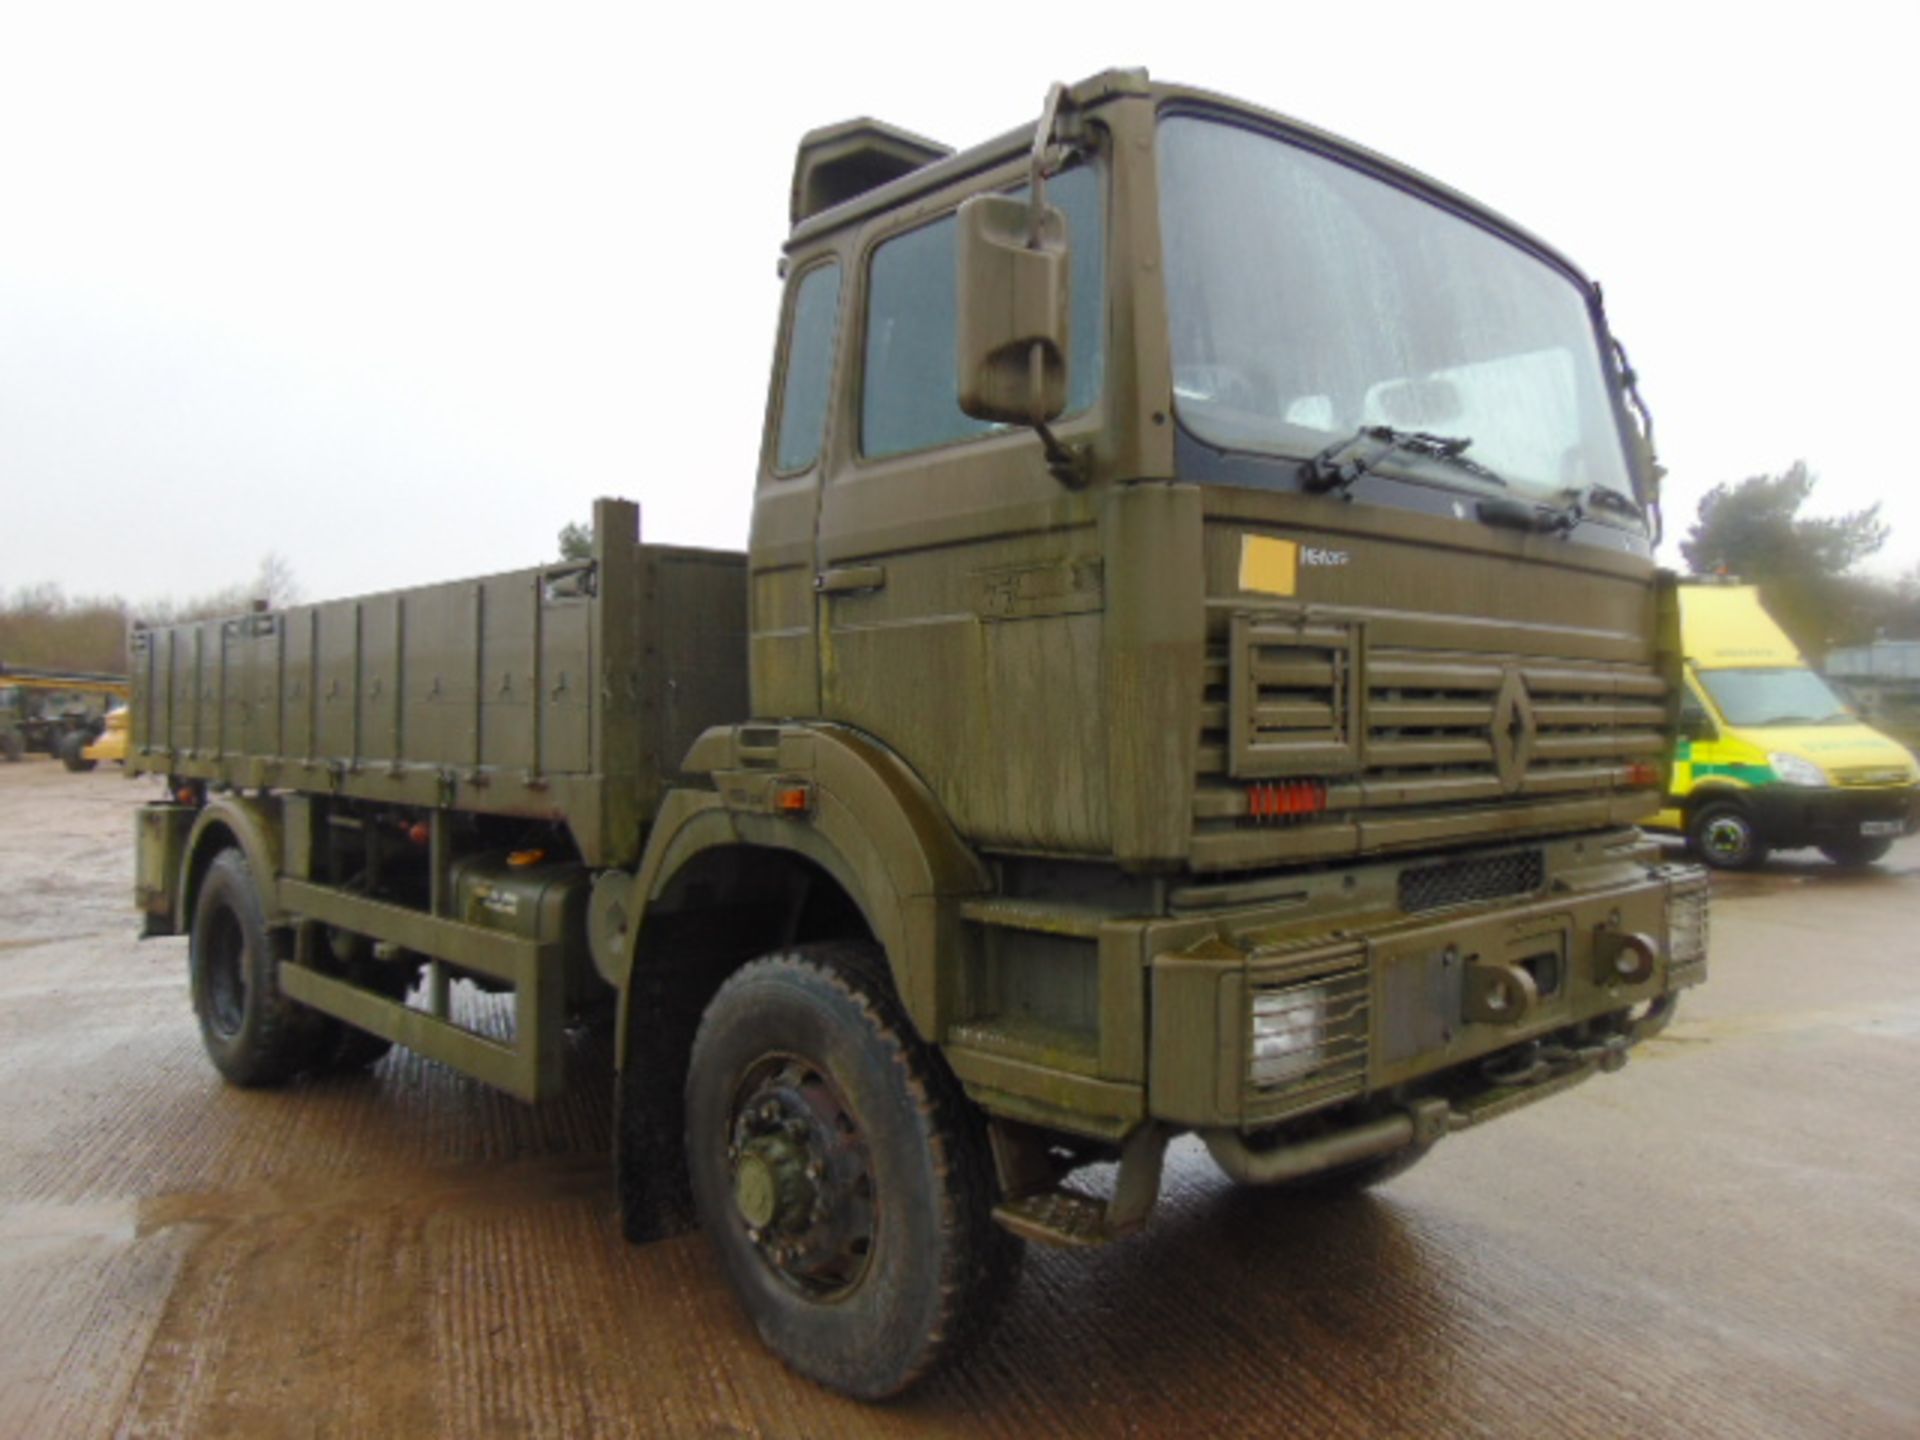 Renault G300 Maxter RHD 4x4 8T Cargo Truck with Fitted Winch